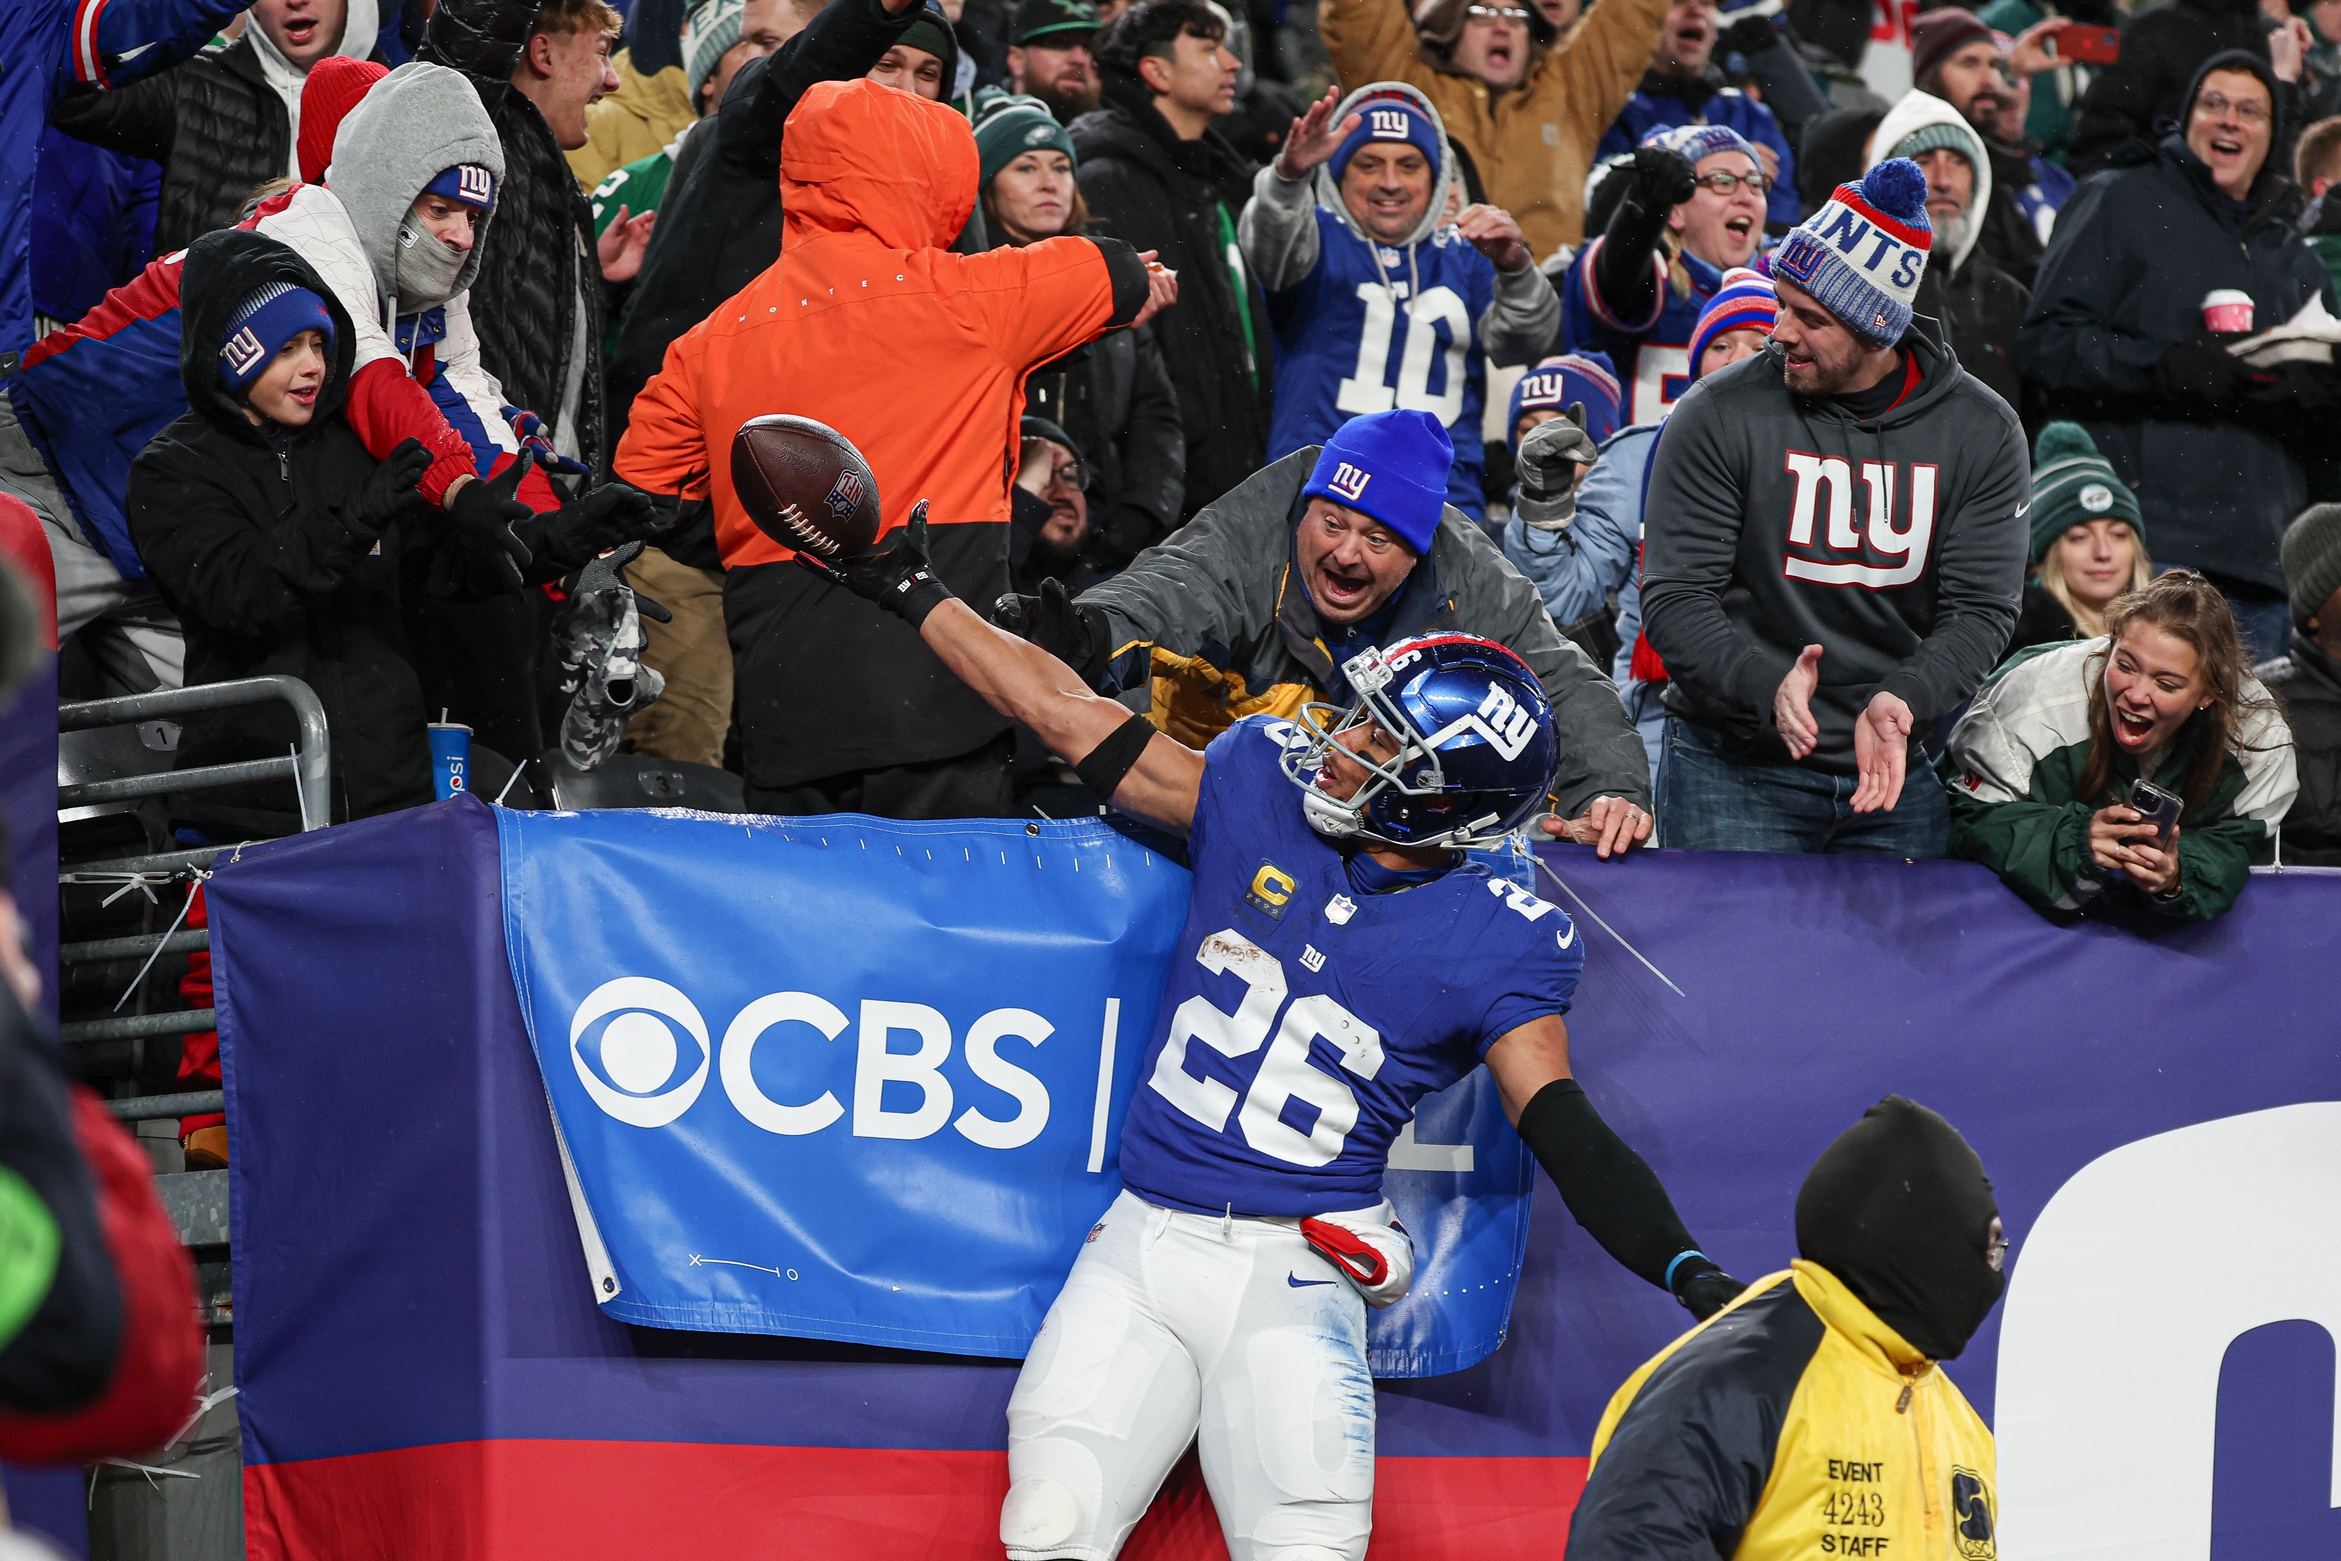 Saquon Barkley To Test Free Agent Market, Could Return to Giants